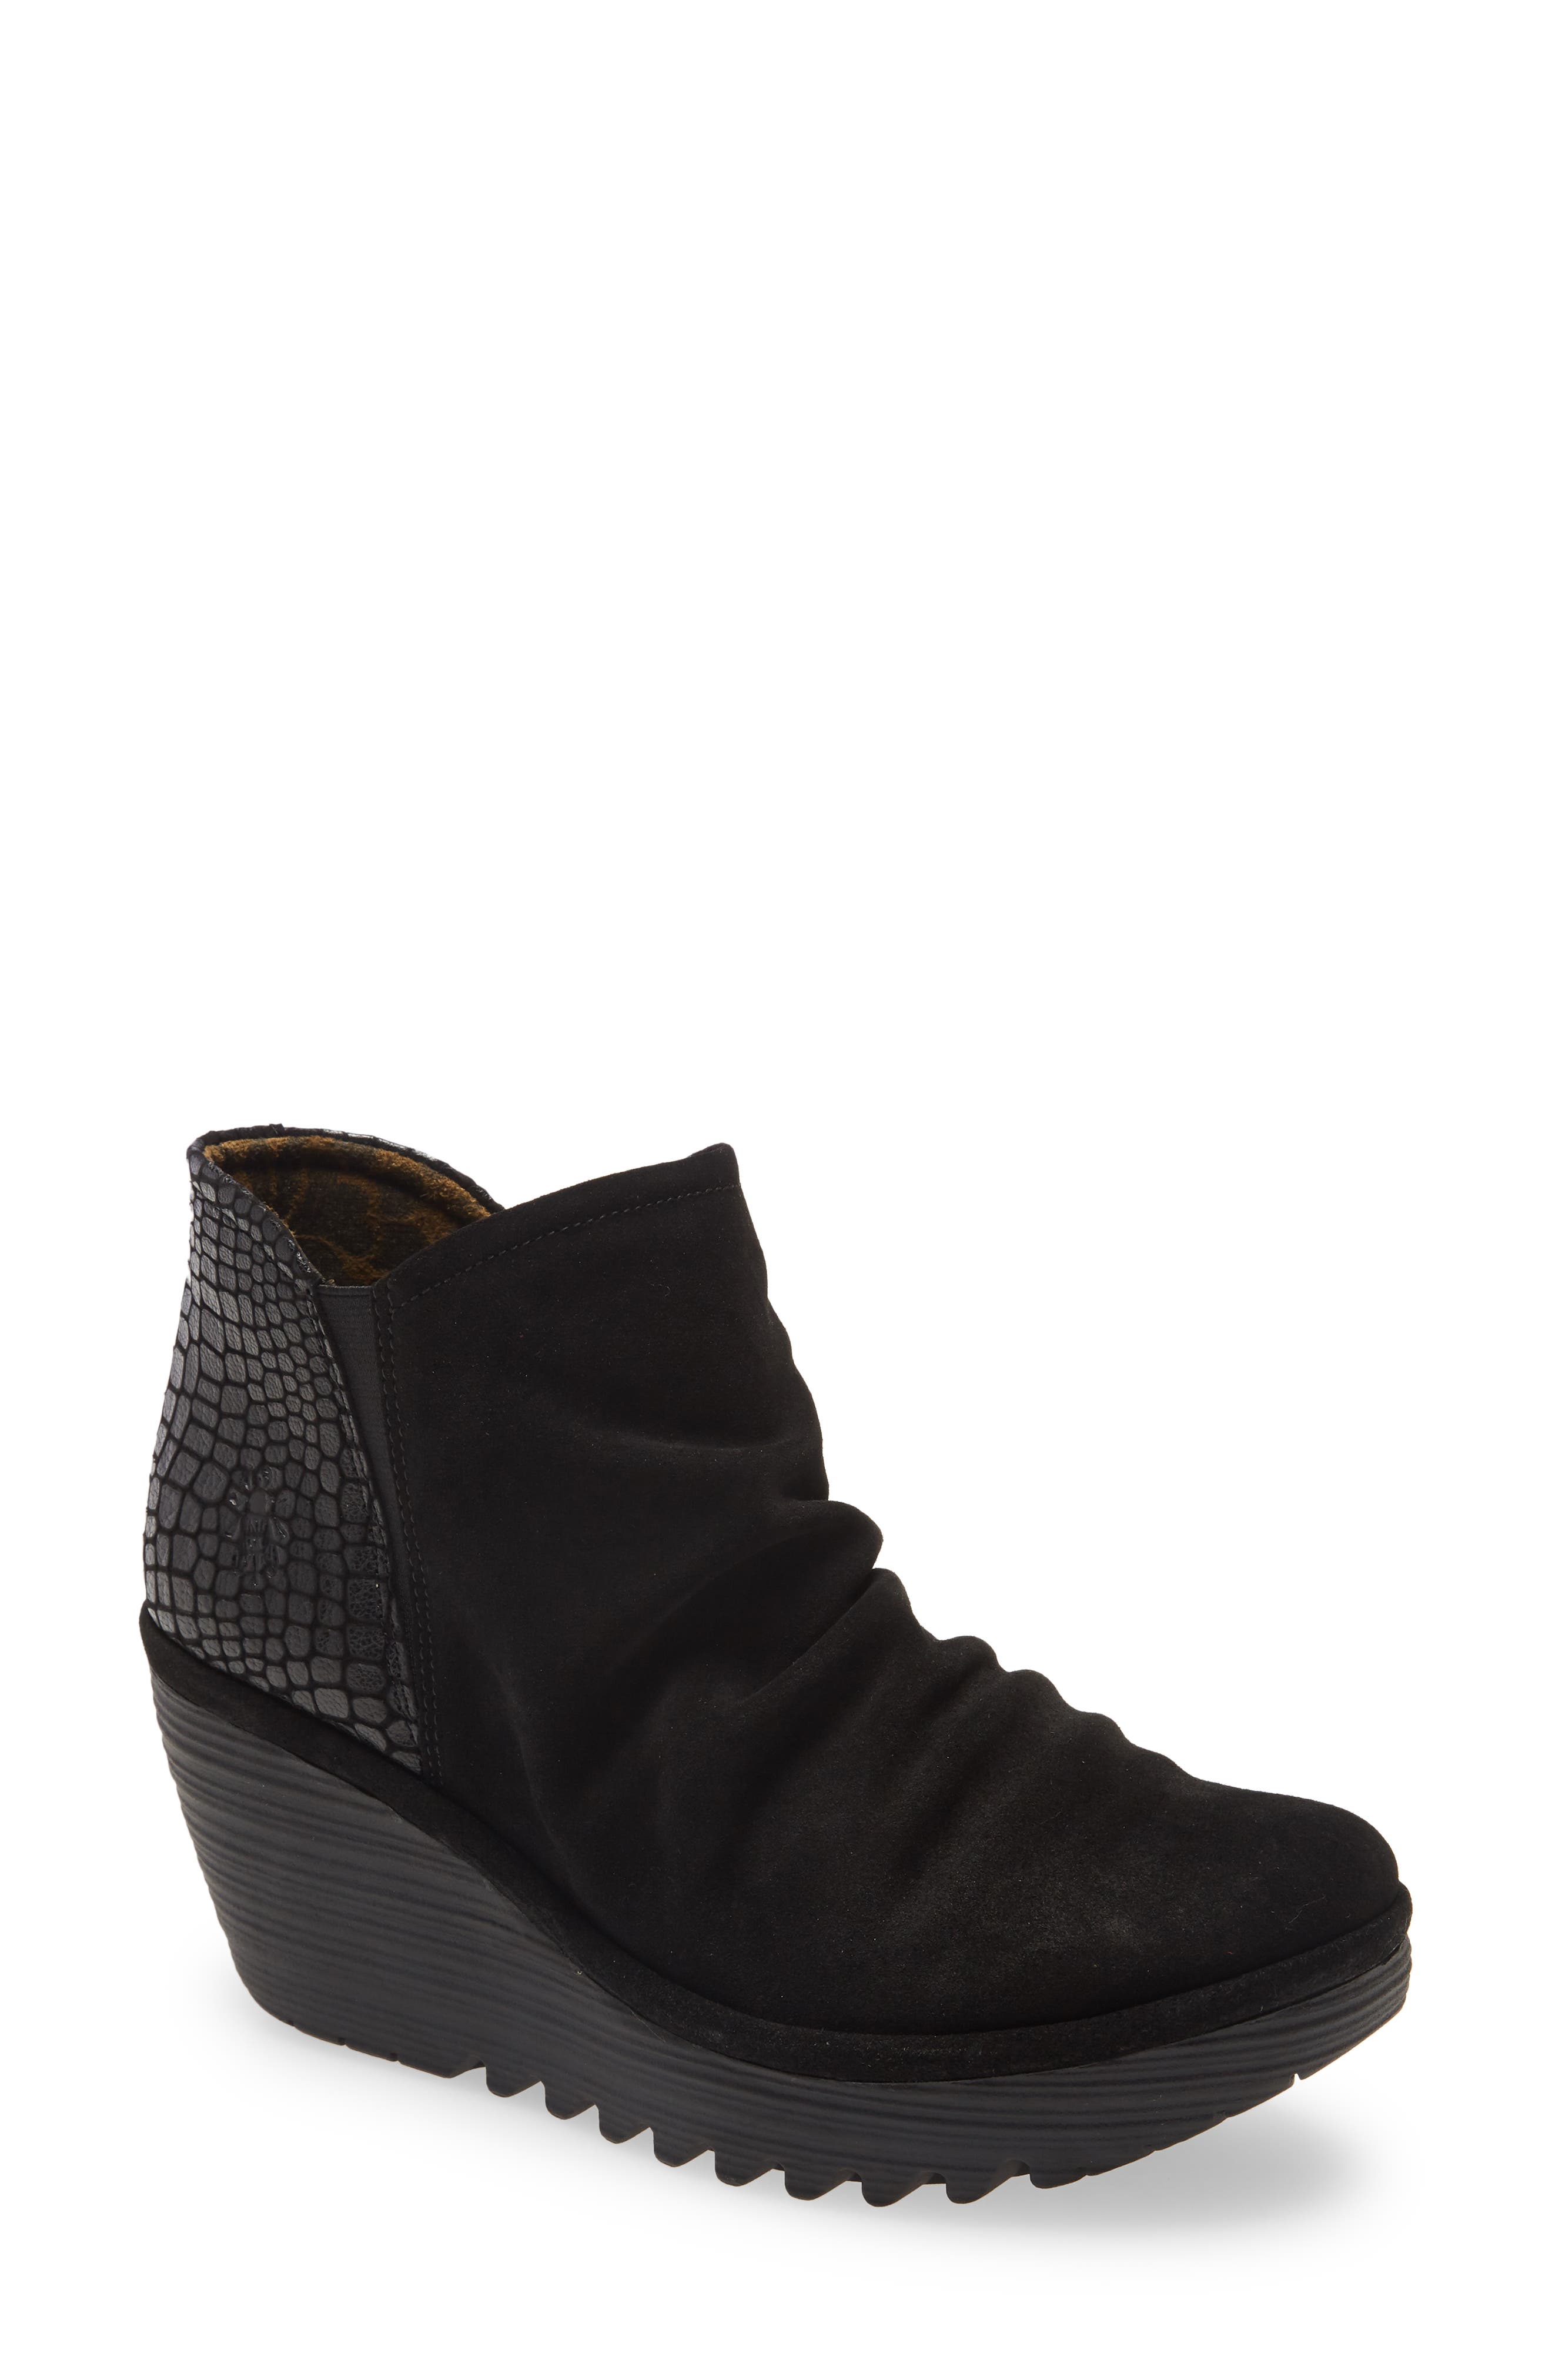 fly london black wedge shoes